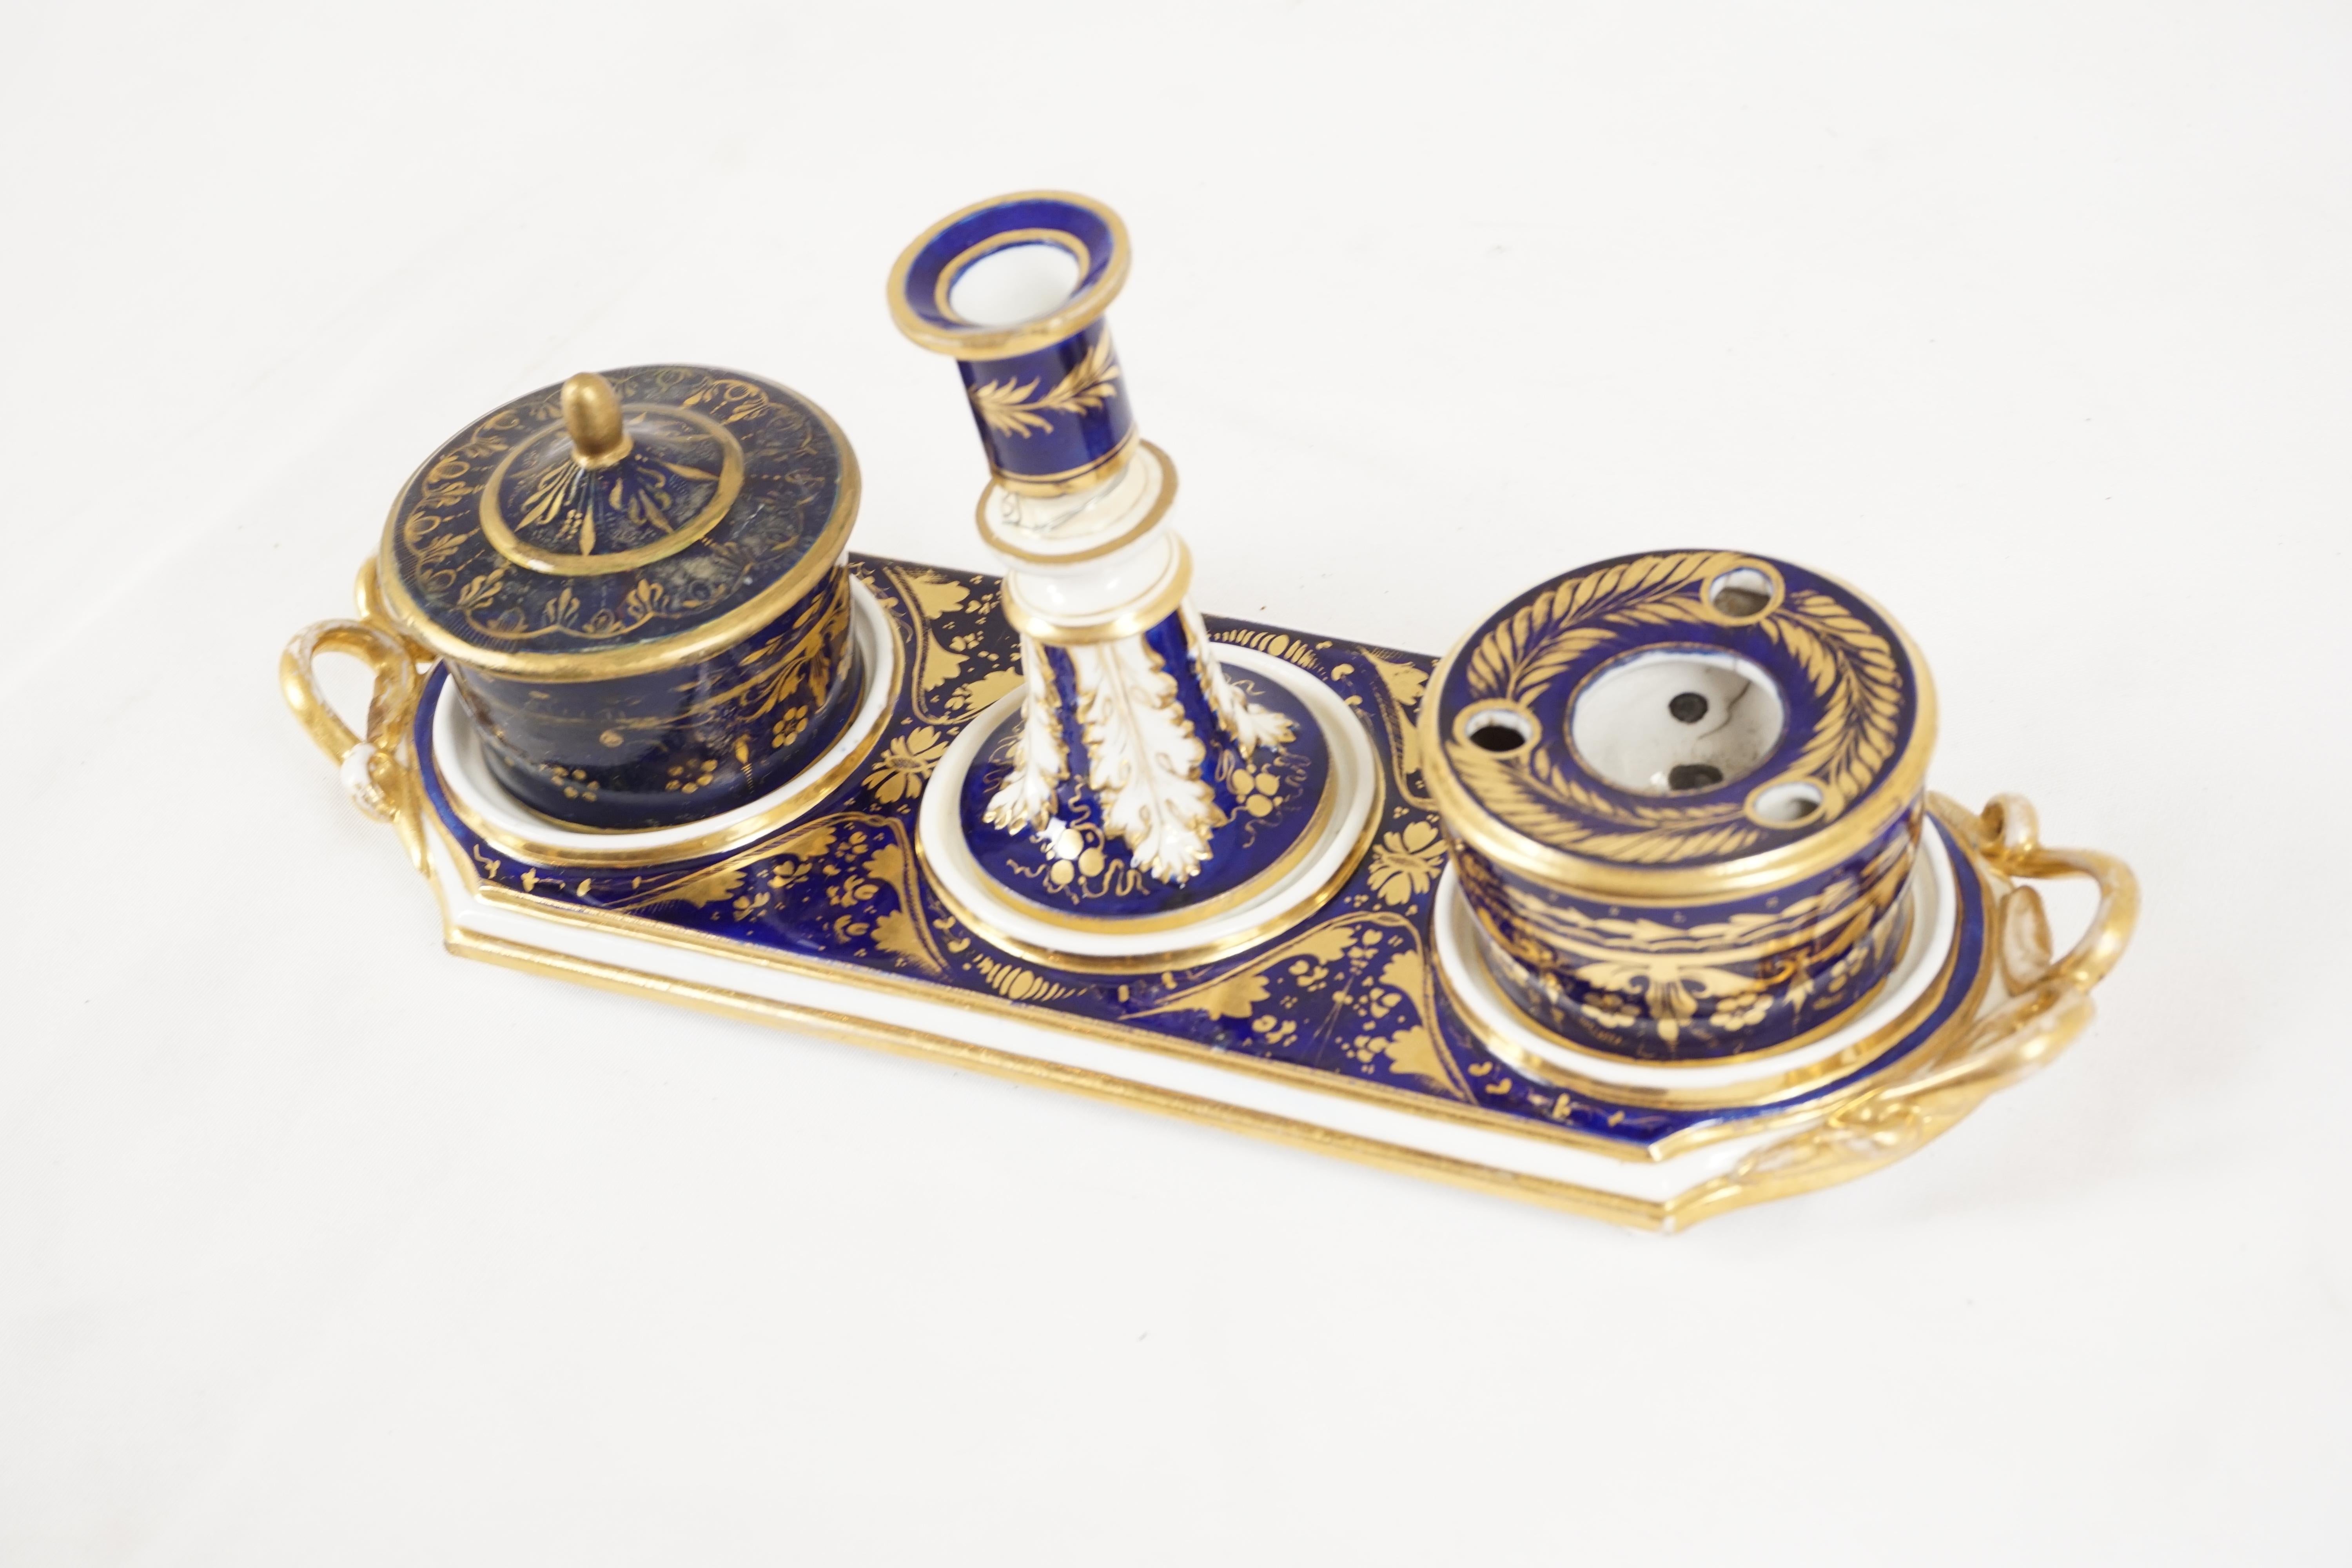 Antique English Derby porcelain ink stand dish on tray, England 1870, H563

Scotland 1870
Tray with blue ground with gilt floral decoration
Single candlestick to the center
Flanked by a porcelain inkwell to the right and to the left a circular stamp